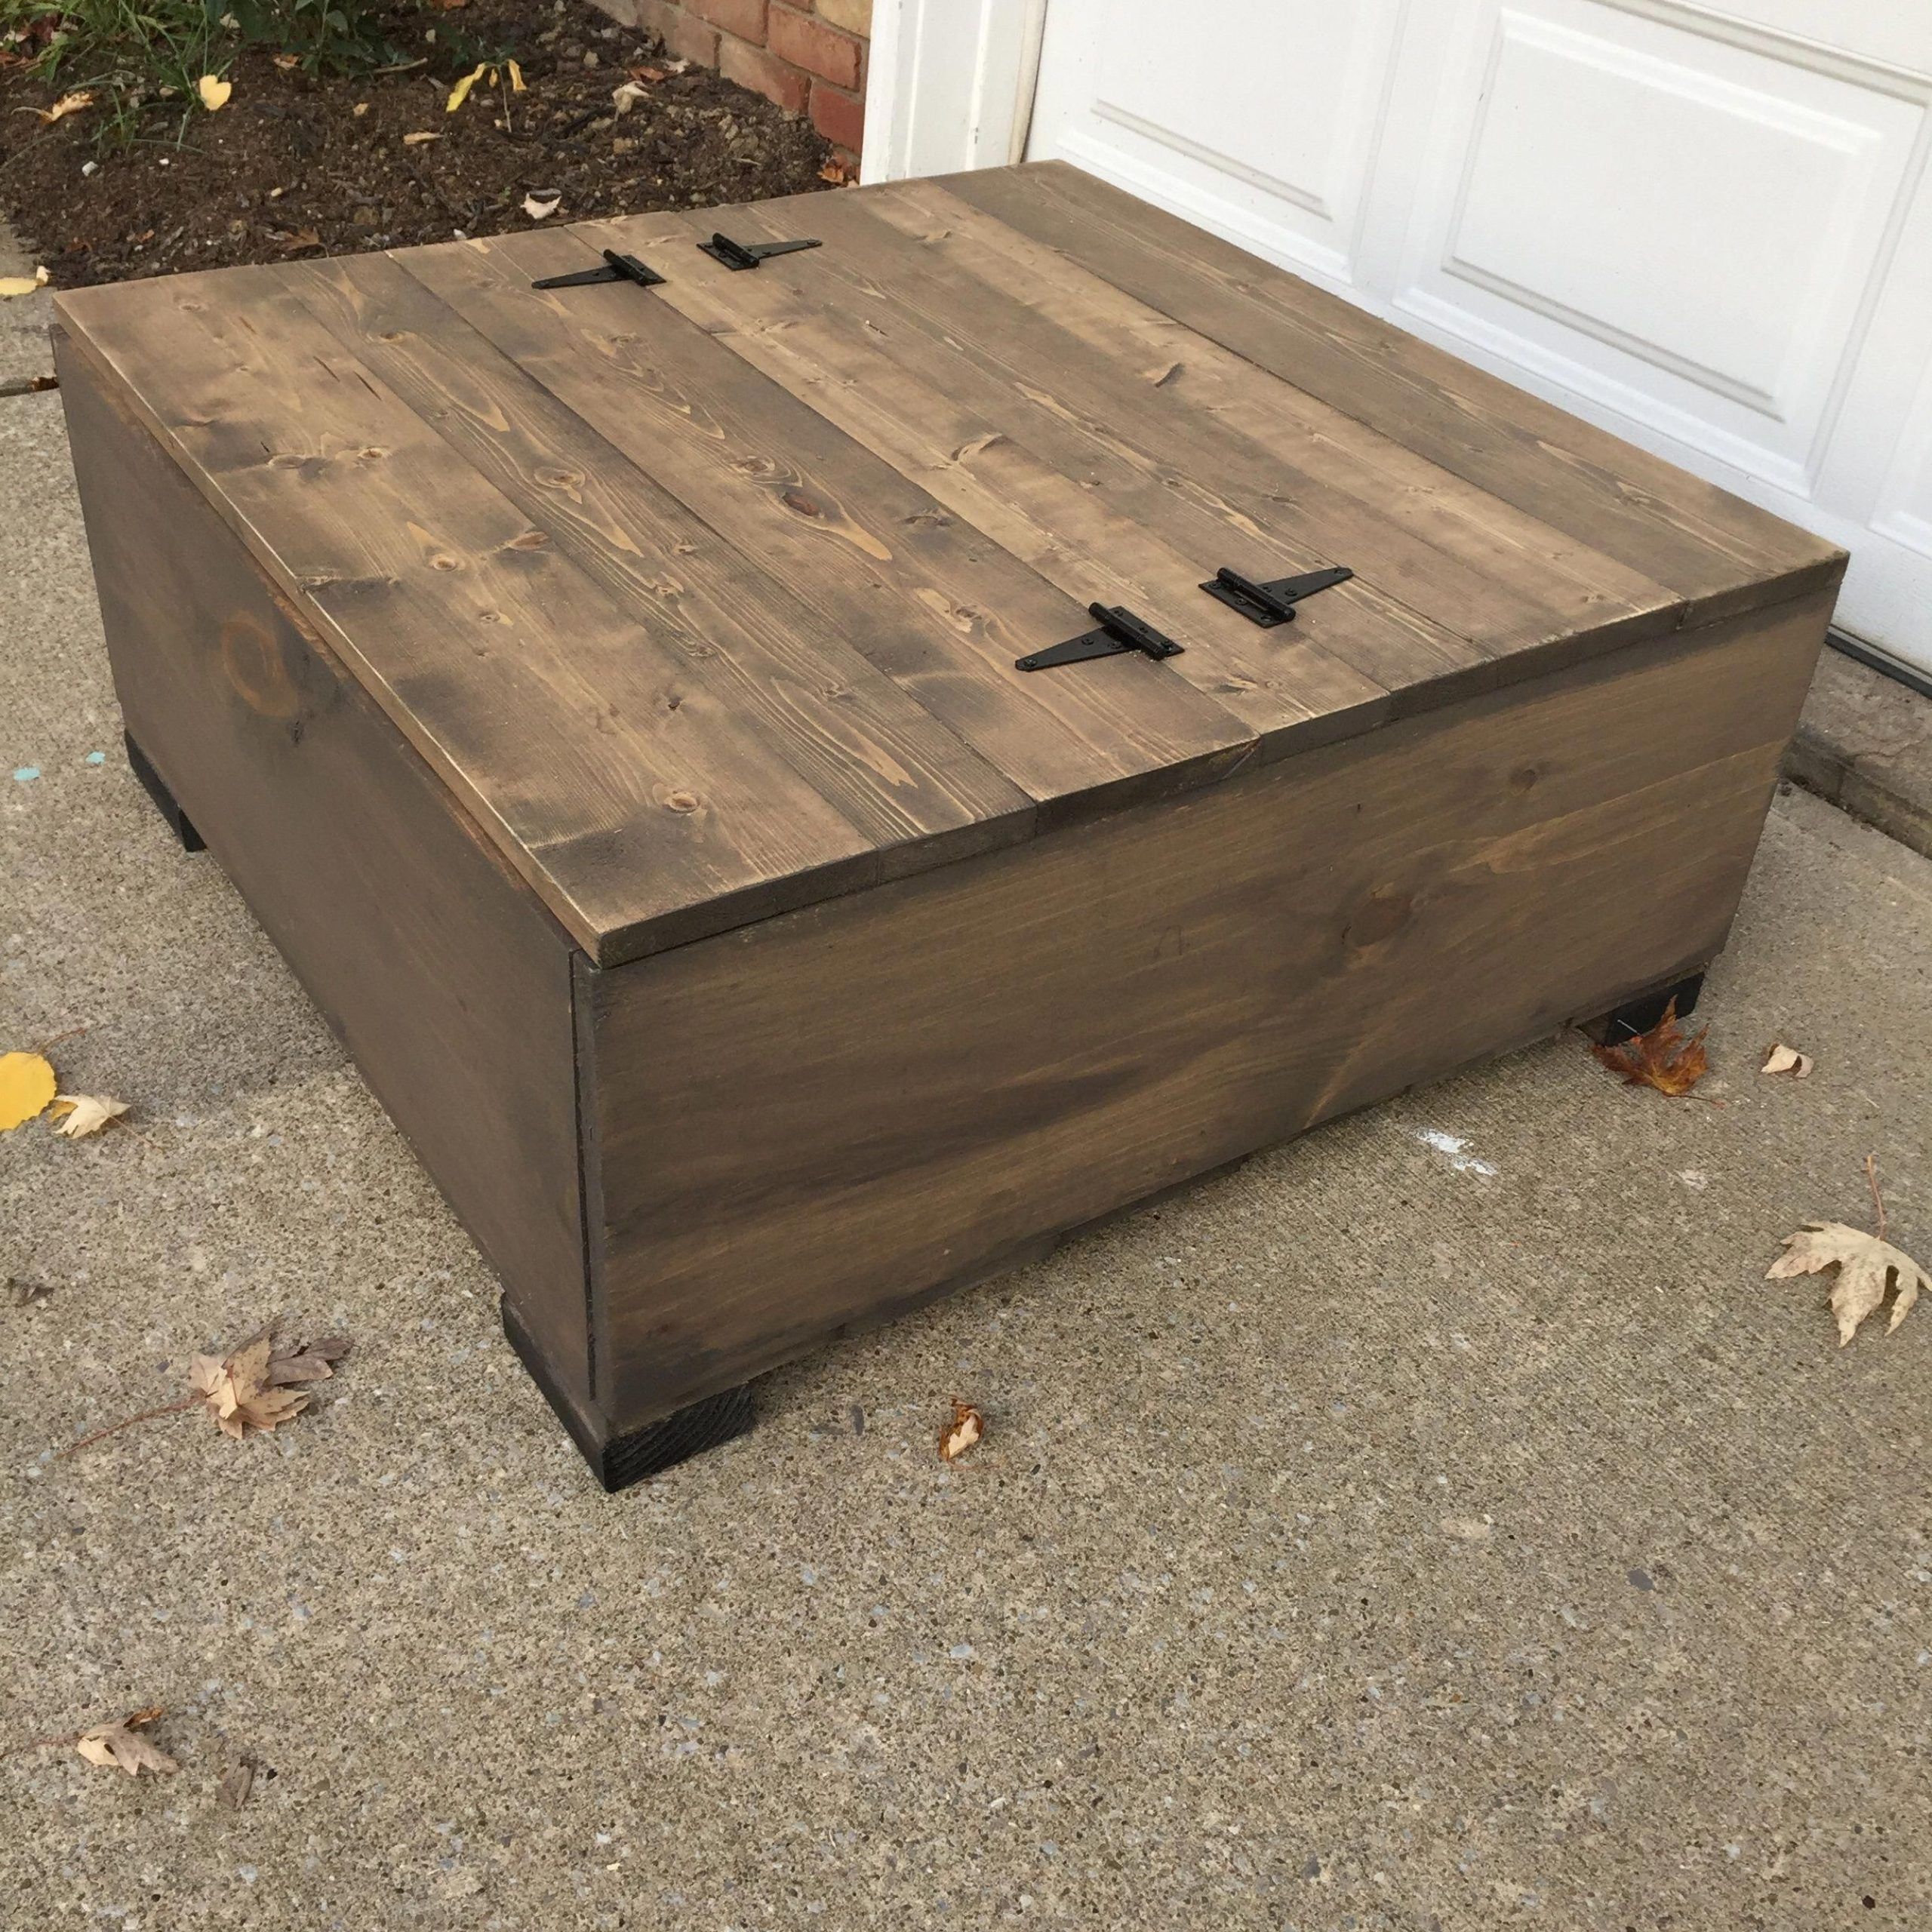 Learn How To Build This Rolling Storage Coffee Table In This How To Throughout Outdoor Coffee Tables With Storage (View 14 of 15)